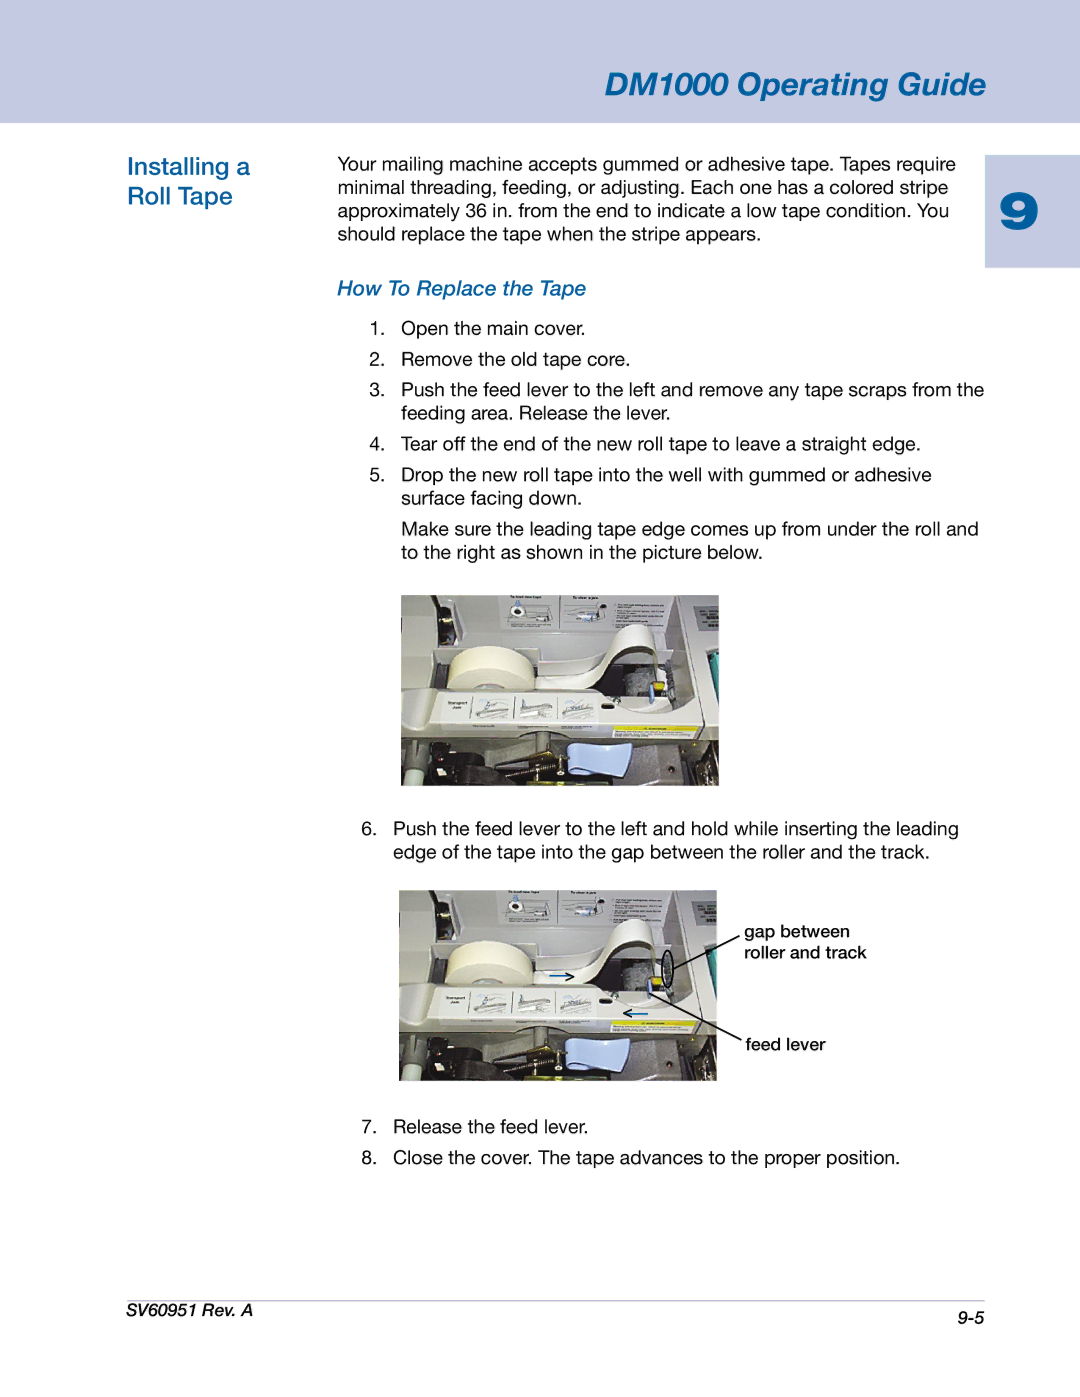 Pitney Bowes DM1000 manual Installing a Roll Tape, How To Replace the Tape 